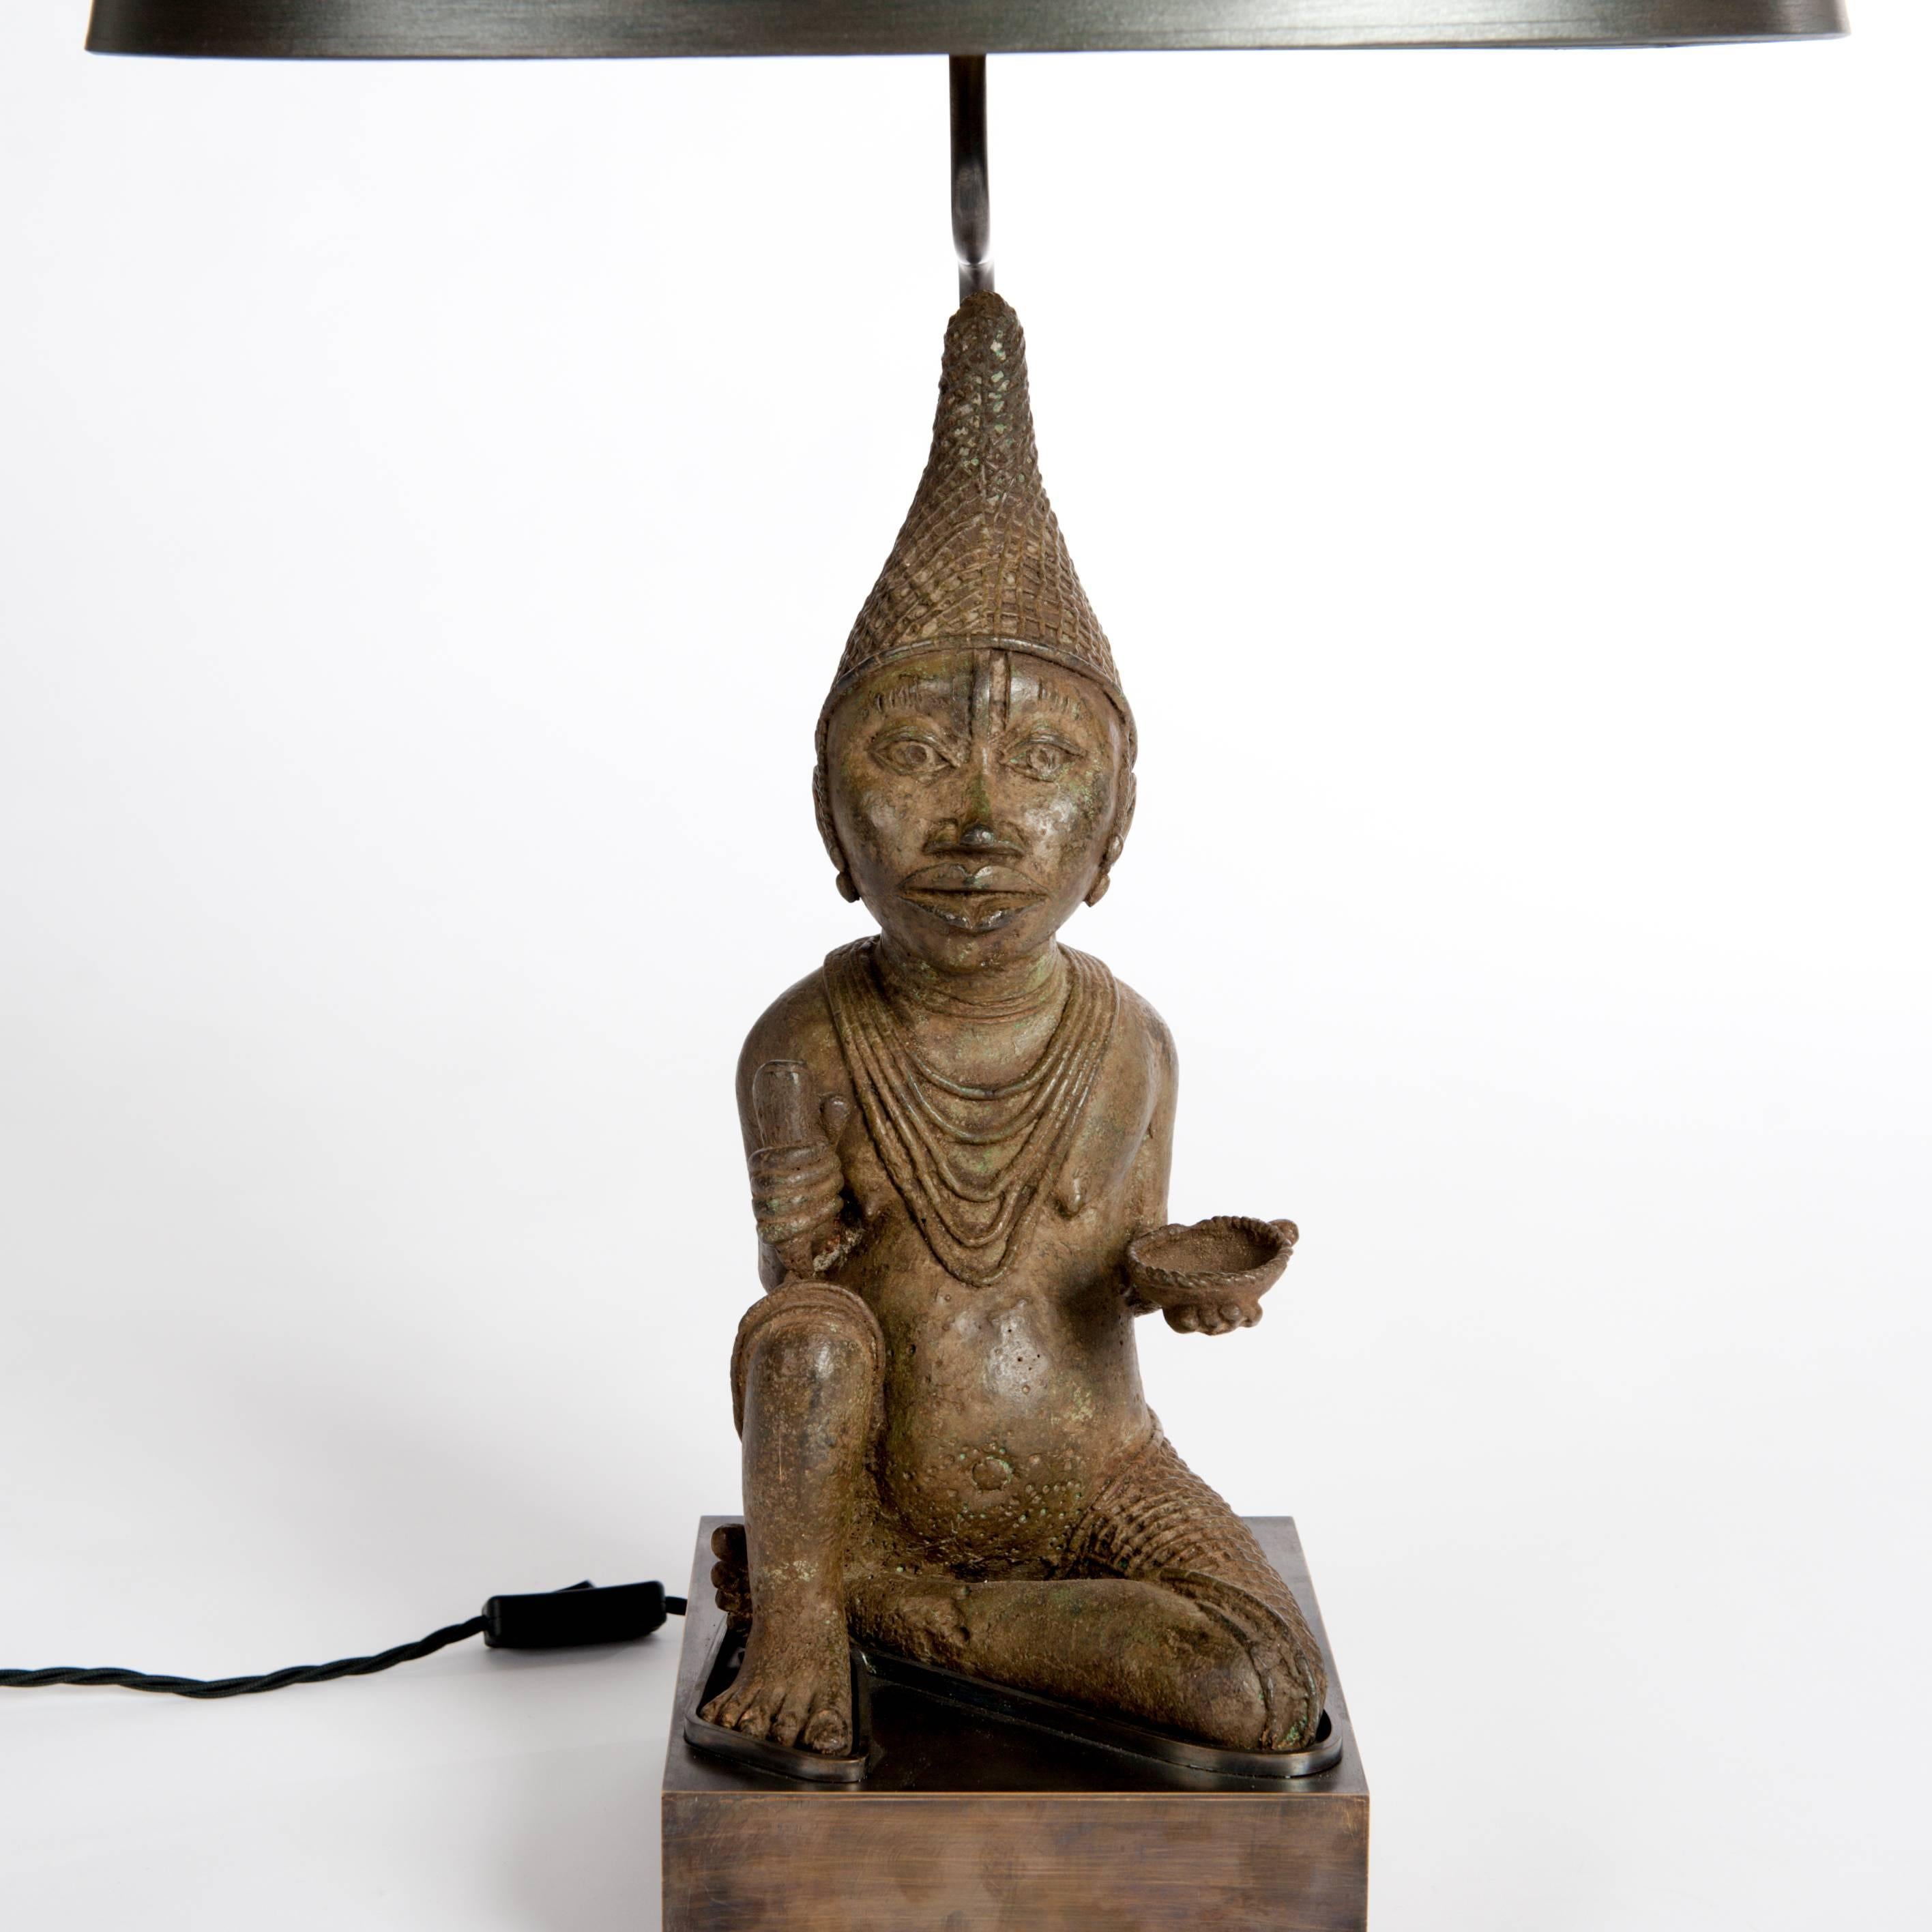 A very fine Mid-Century African Tribal cast bronze from Benin arranged 
with a specially designed lamp construction and socle.
The oval lampshade is hand-painted in green-brown color with fine
overlay of silver powder.

Measurements of the